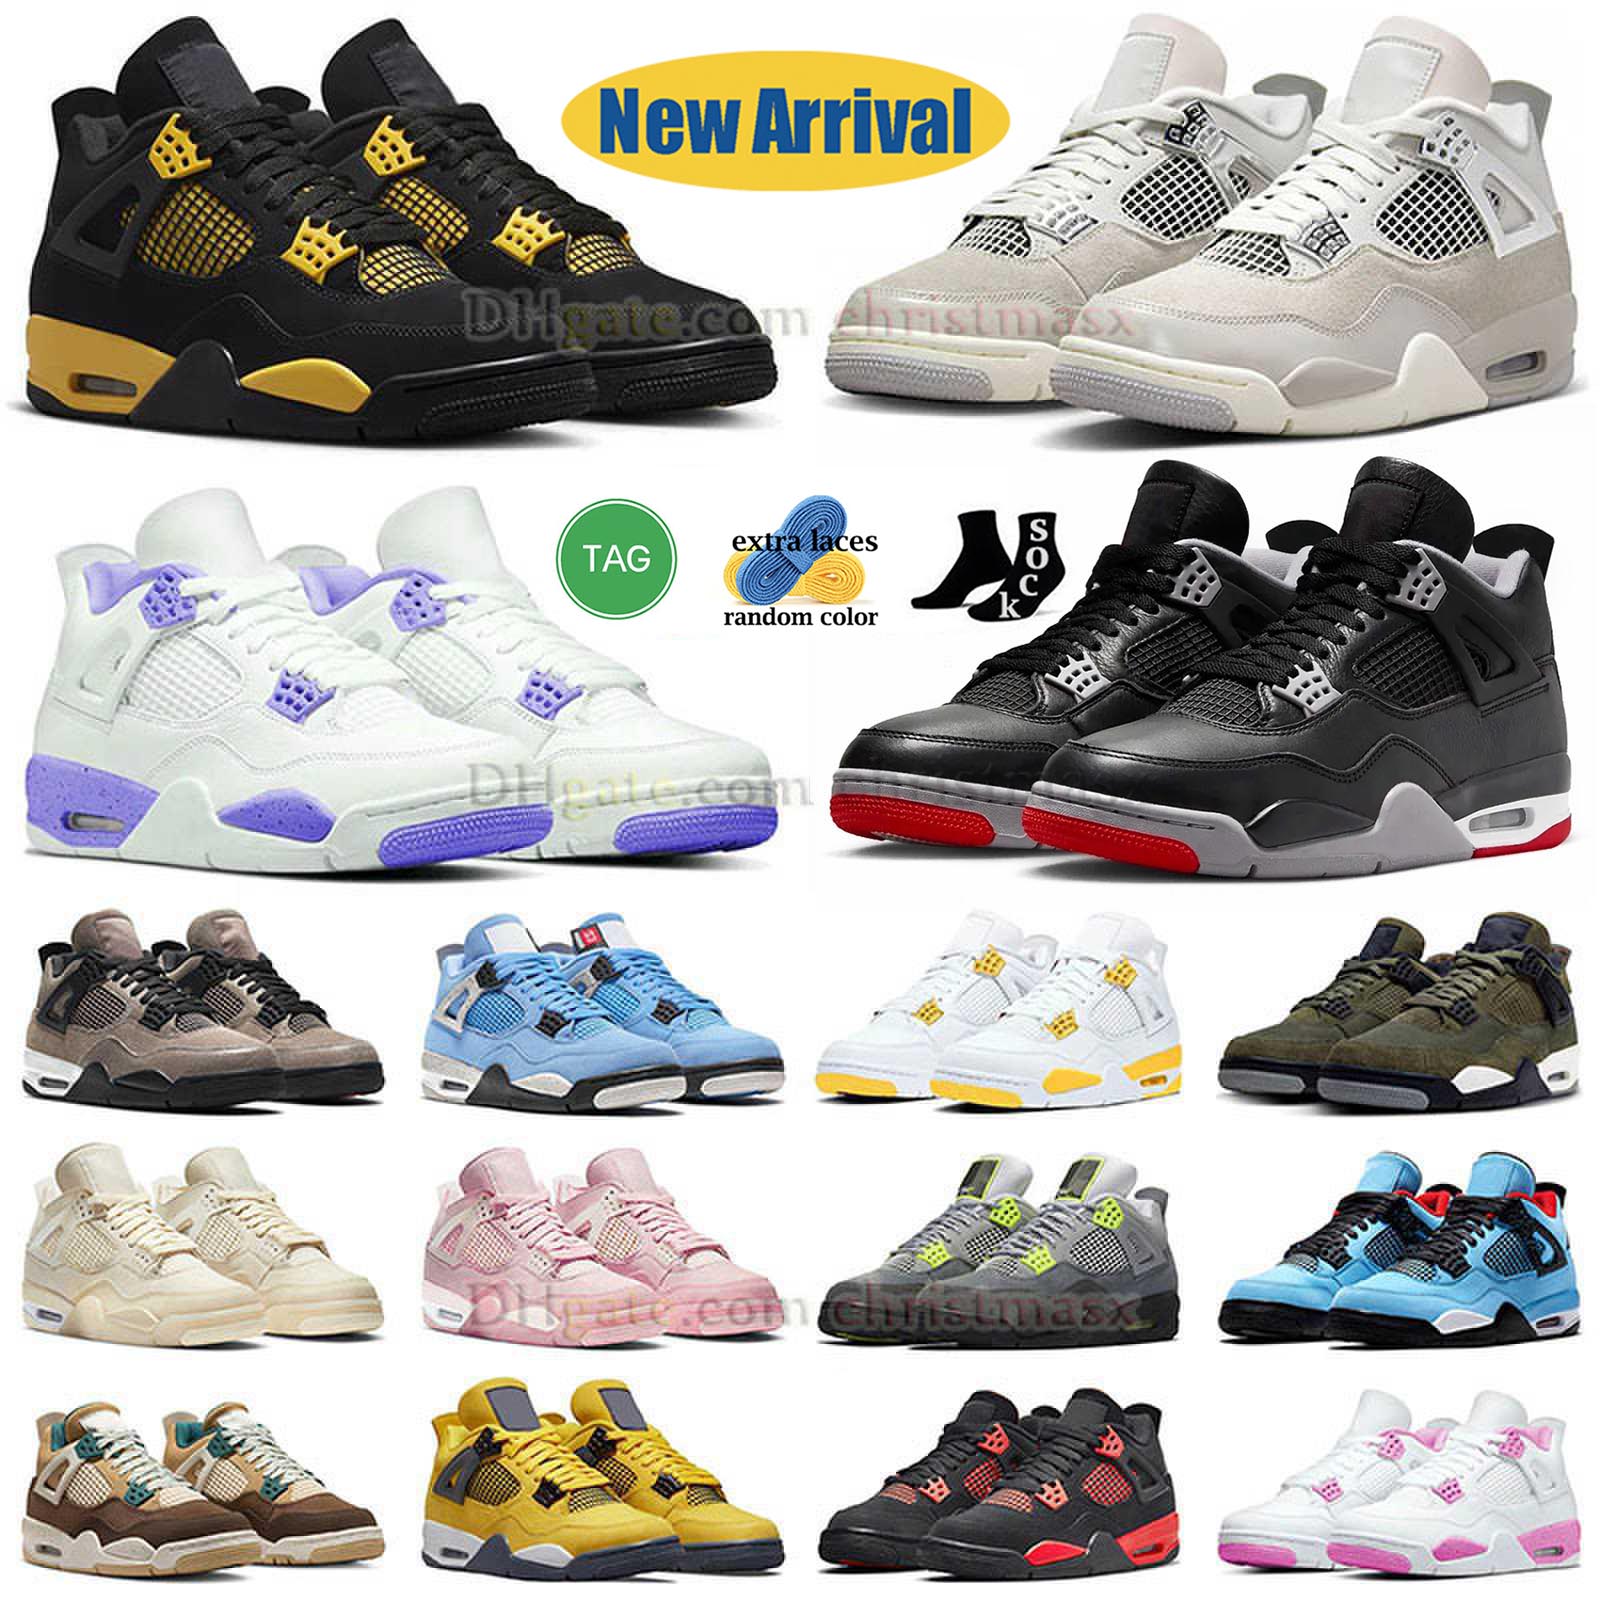 basketball shoes jumpman 4 yellow red white pink thunder mens womens military hordans 4 black cat sneakers pine green j4 freeze moment purple oreos pure money trainer